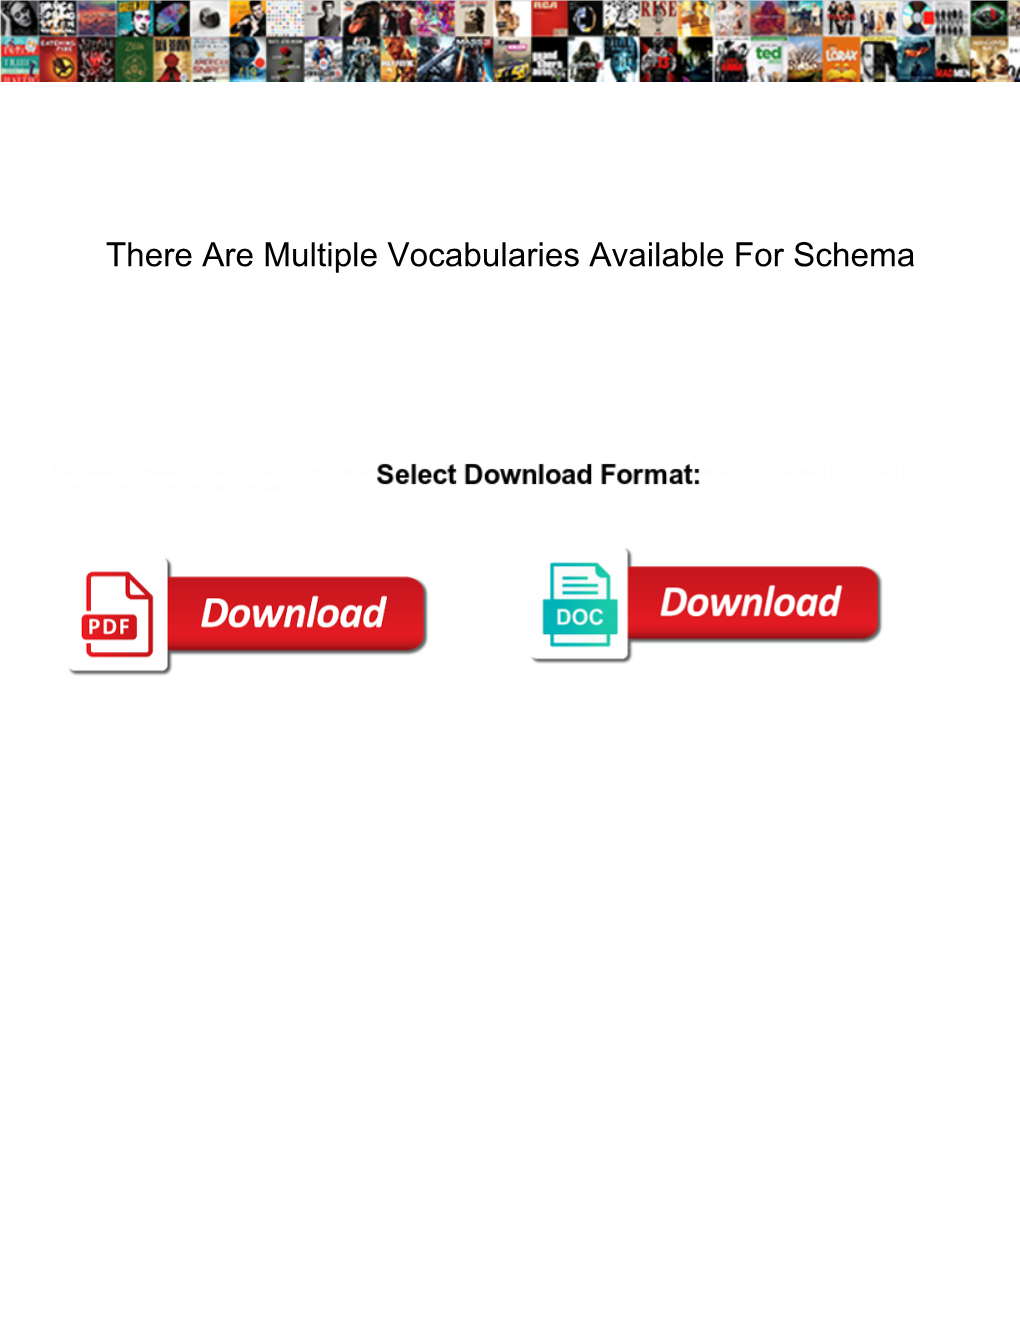 There Are Multiple Vocabularies Available for Schema